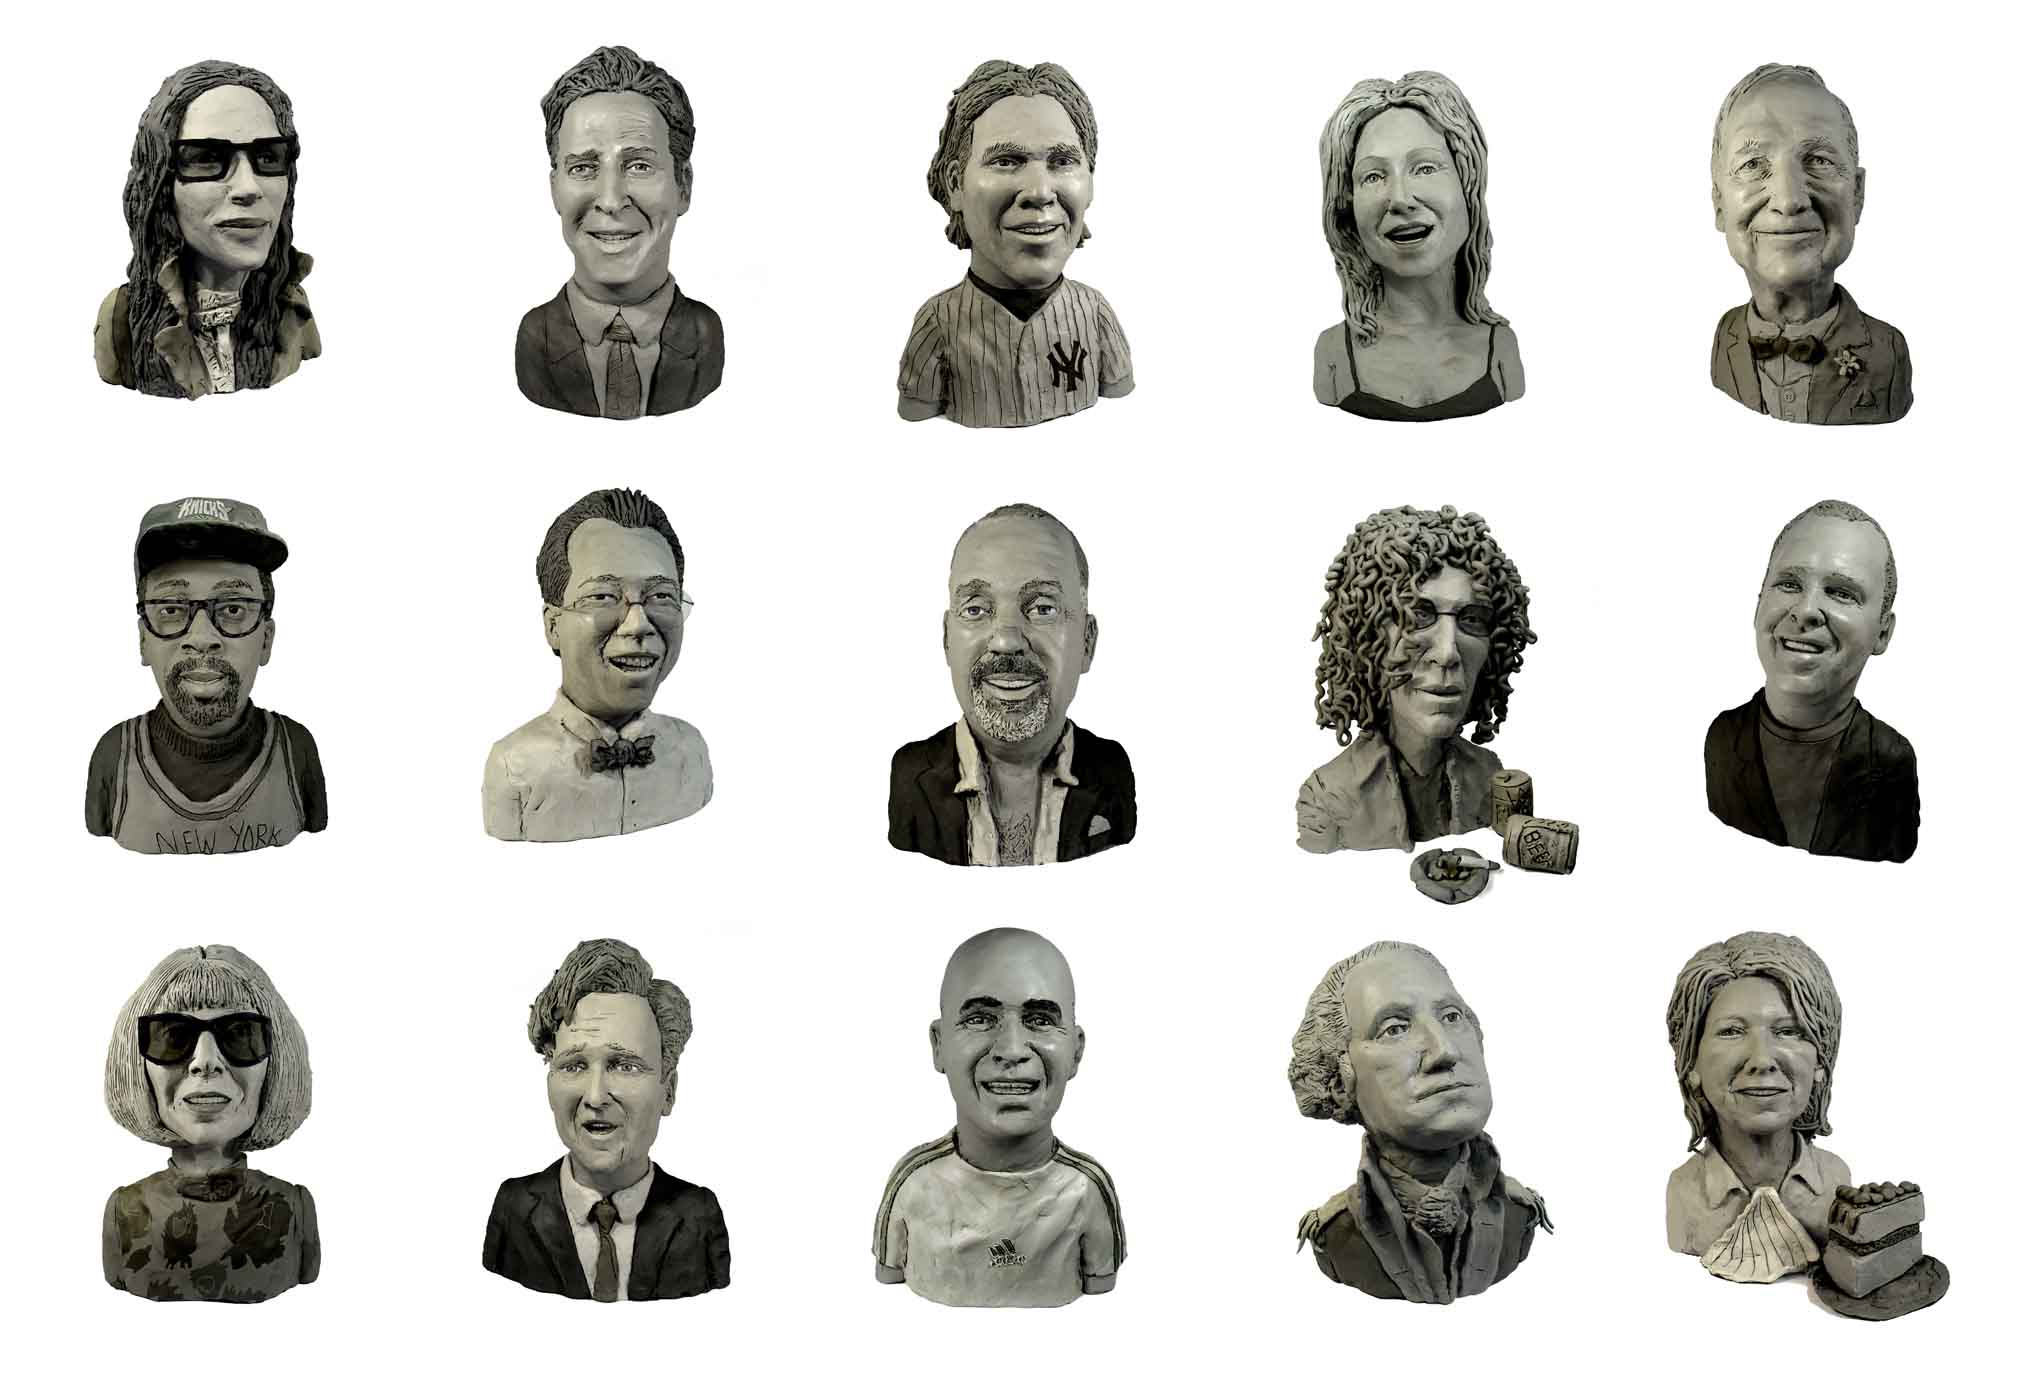  As seen in the "The Week" section of New York Magazine, 52 heads in over 500 different poses. 